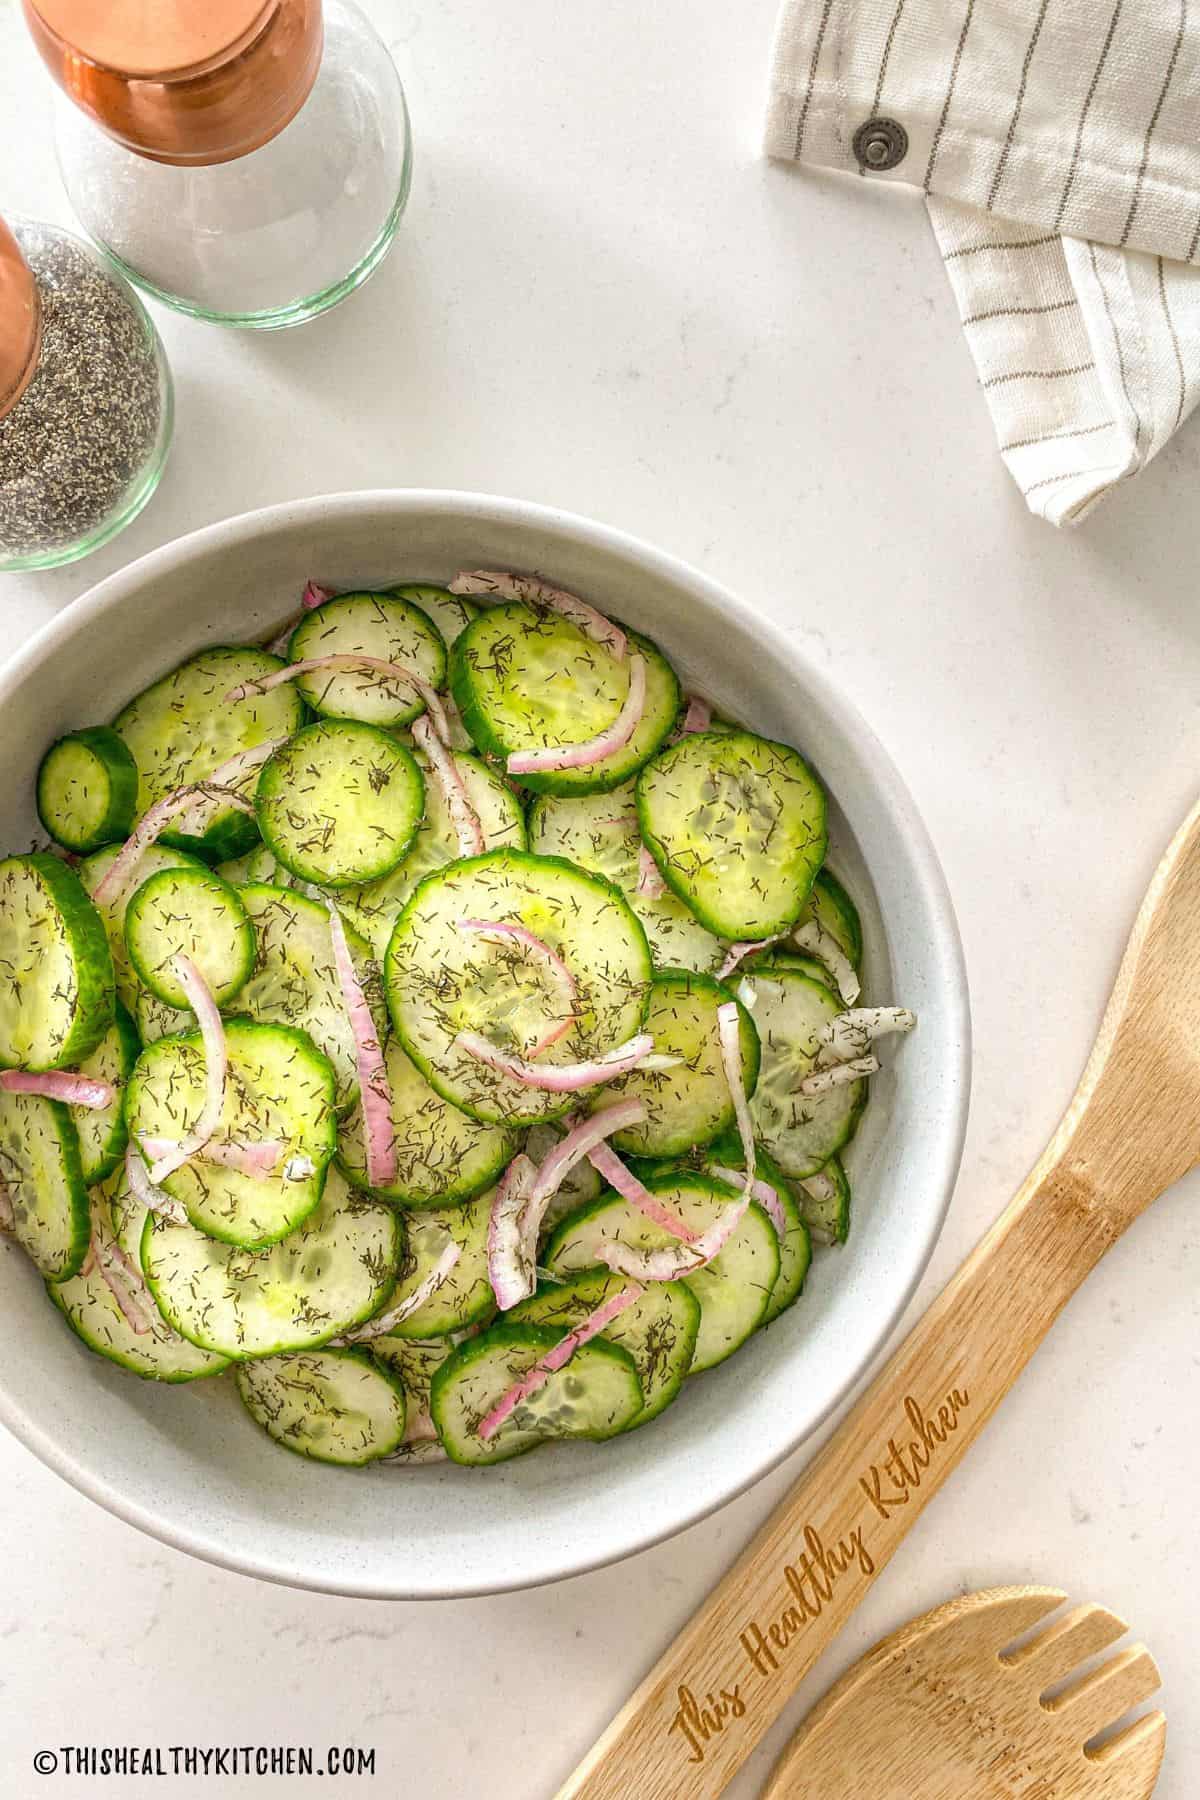 Cucumber salad with dill in serving bowl.